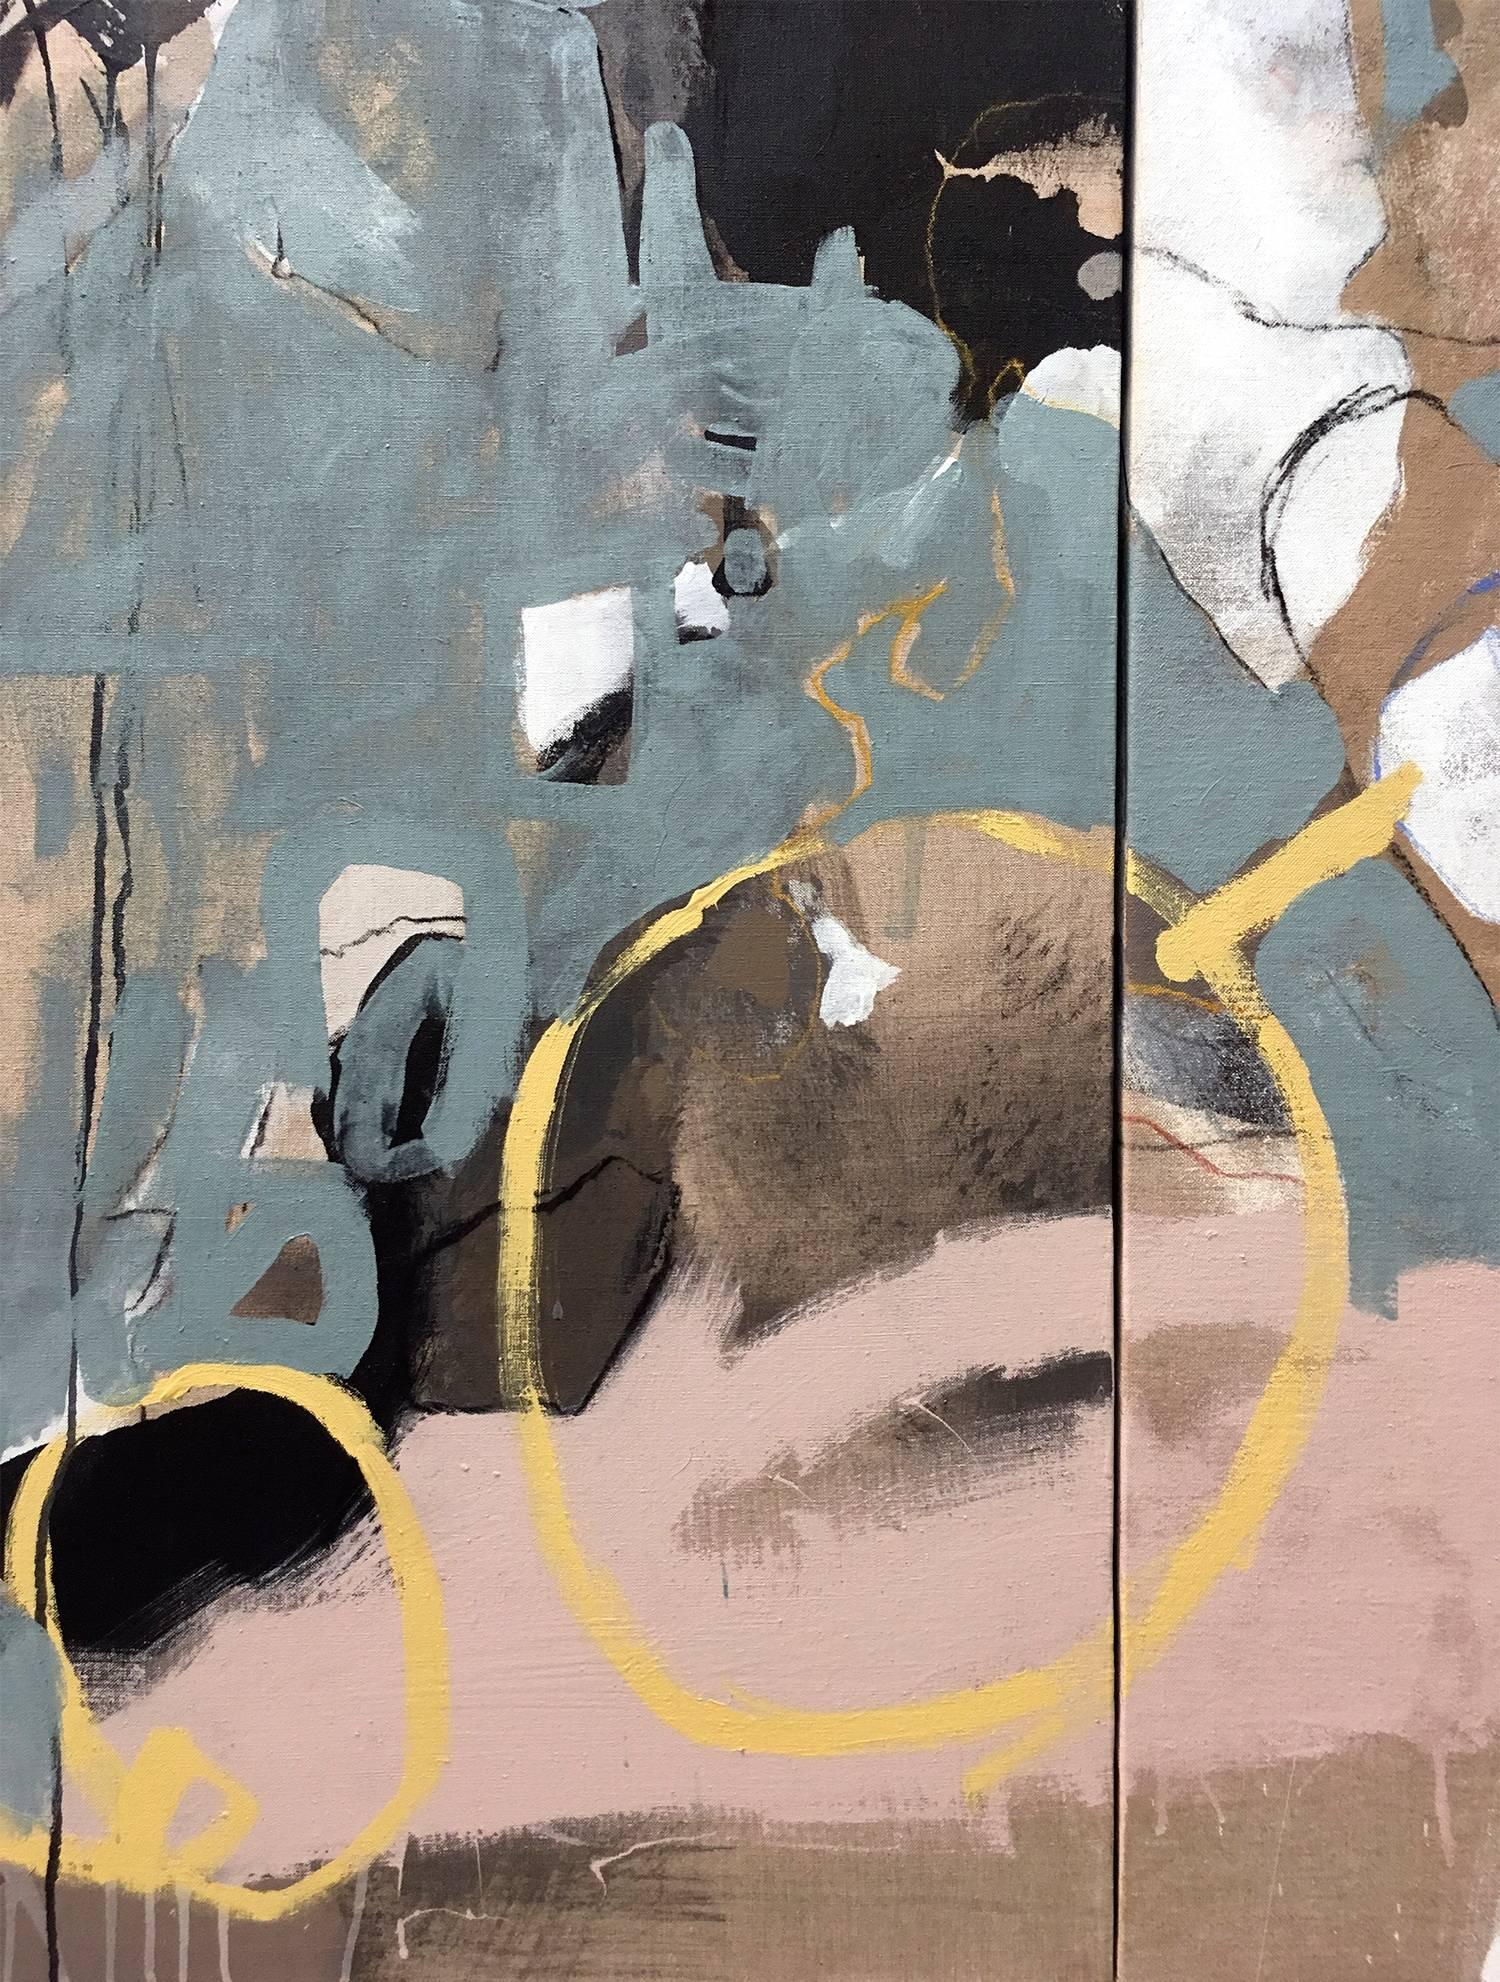 This mixed-media work by Anna Schuleit Haber includes acrylic, ink, and oil pastel (but no oil paint) on linen. For Schuleit Haber, her large scale artworks draw in the viewer by combining the abstract with realistic elements. A line turns into a